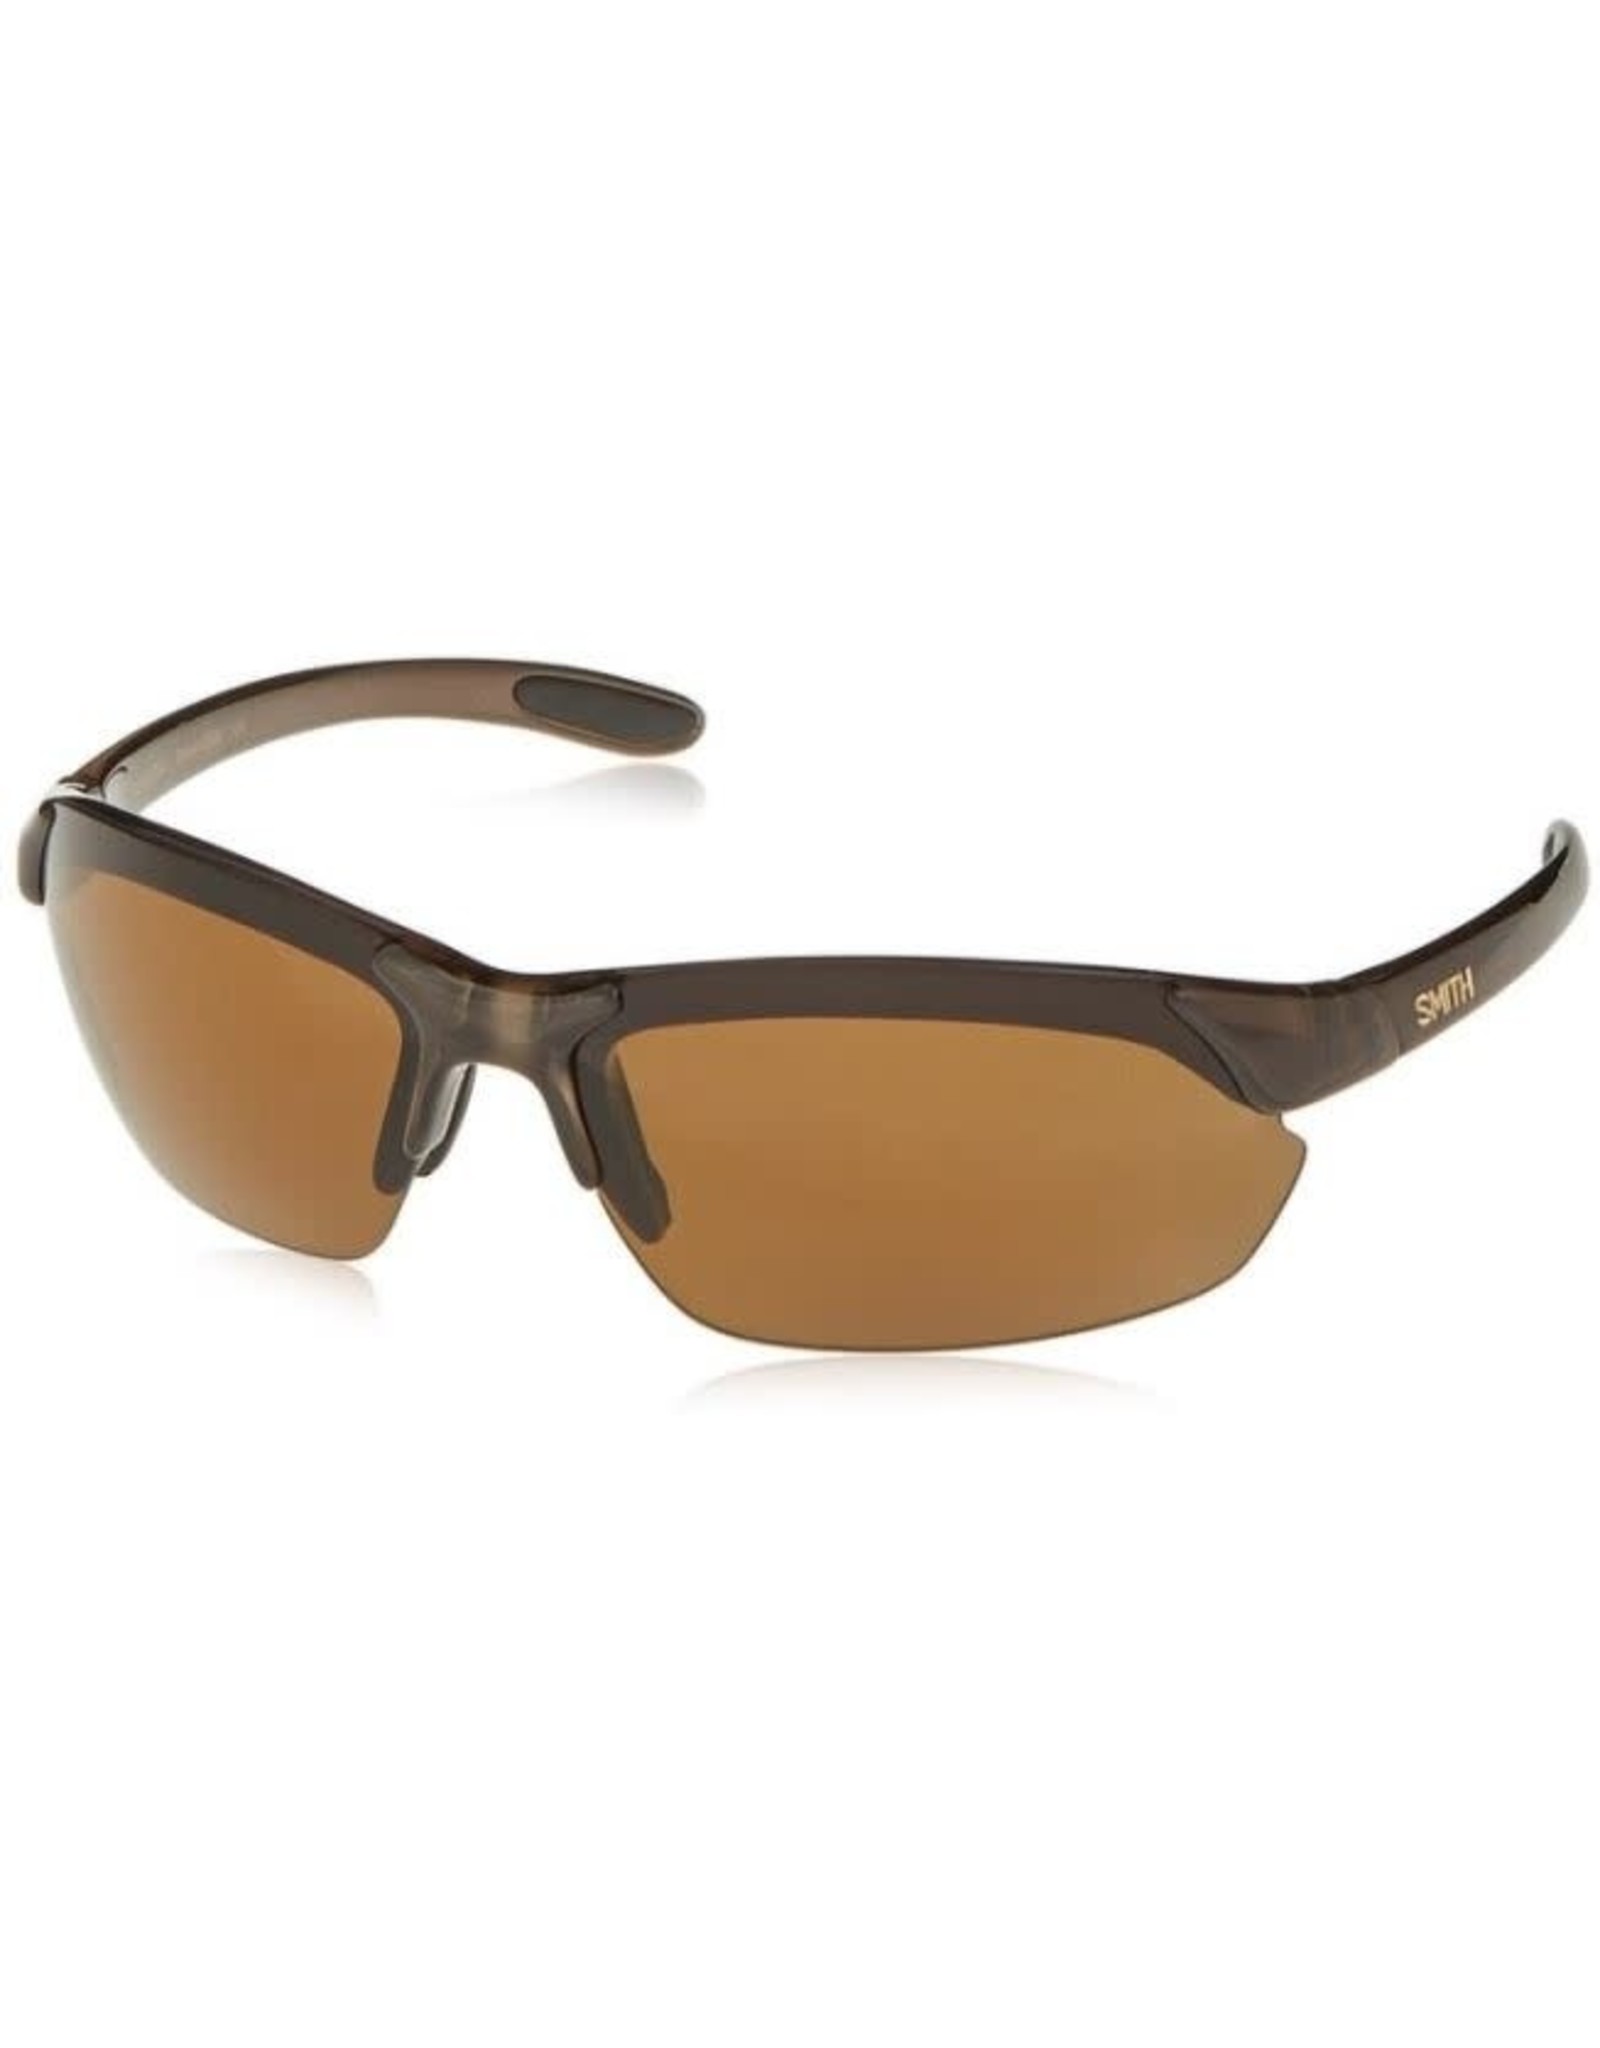 Smith Glasses Smith Parallel brown polarized ingitor clear